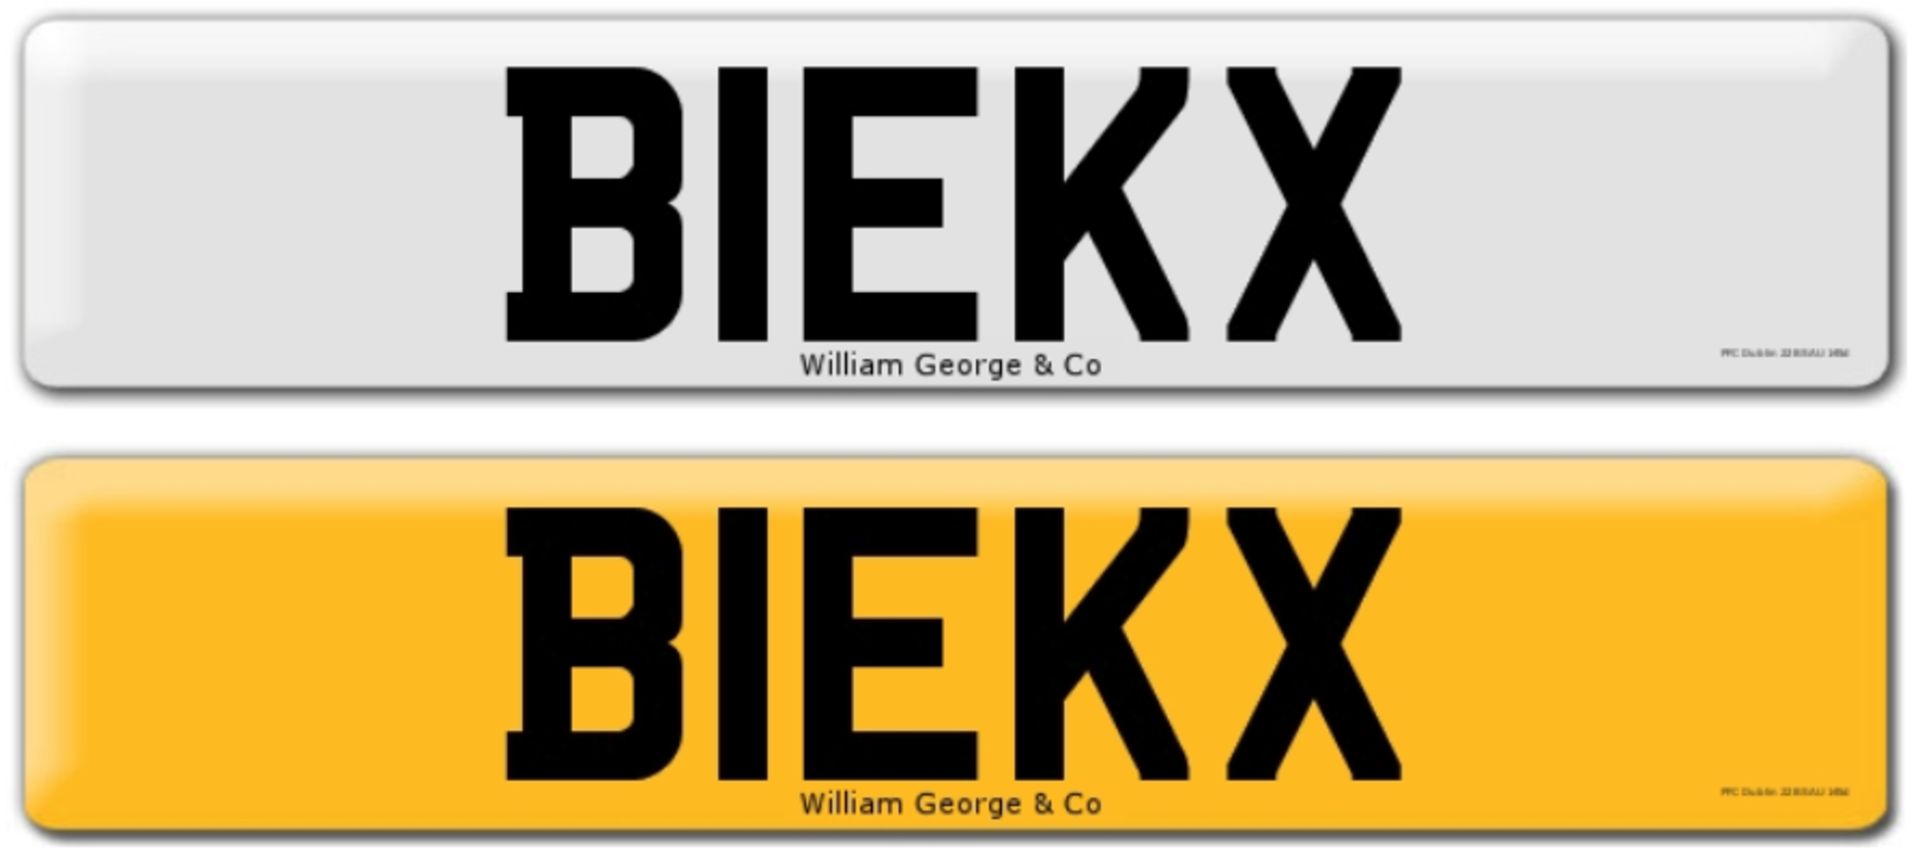 Registration on DVLA retention certificate, ready to transfer B1EKX, This number plate /